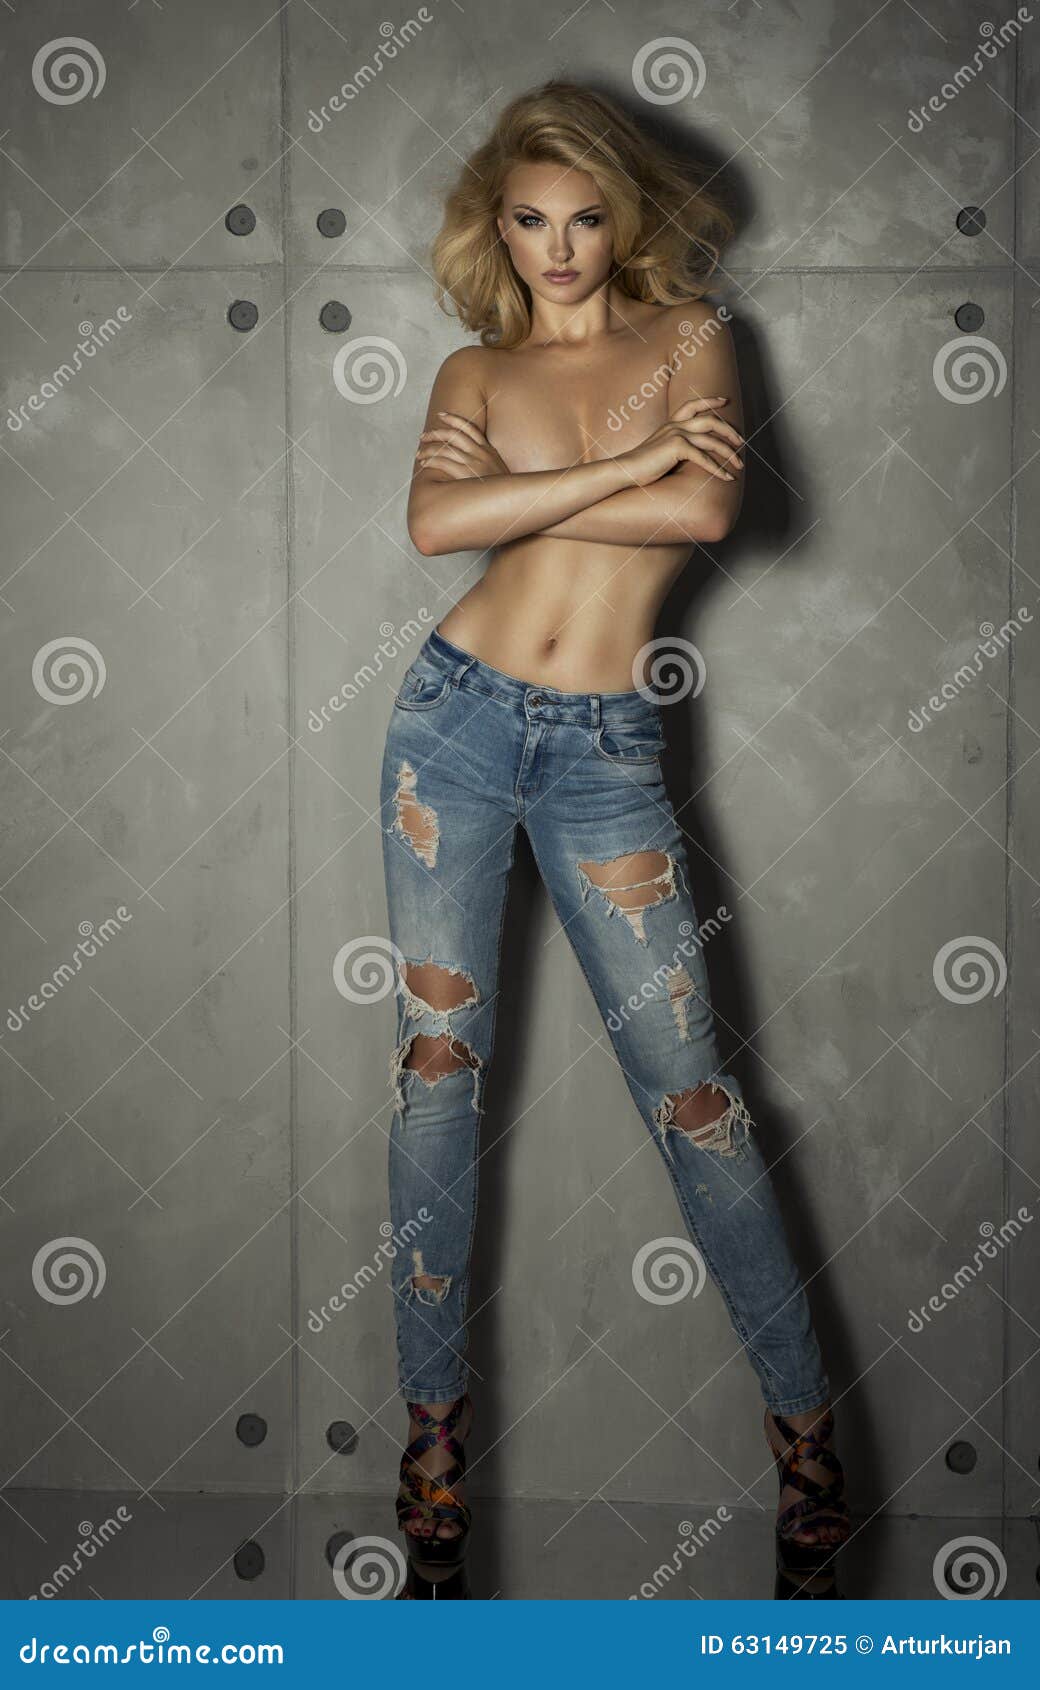 Young, fit and woman only in jeans. 